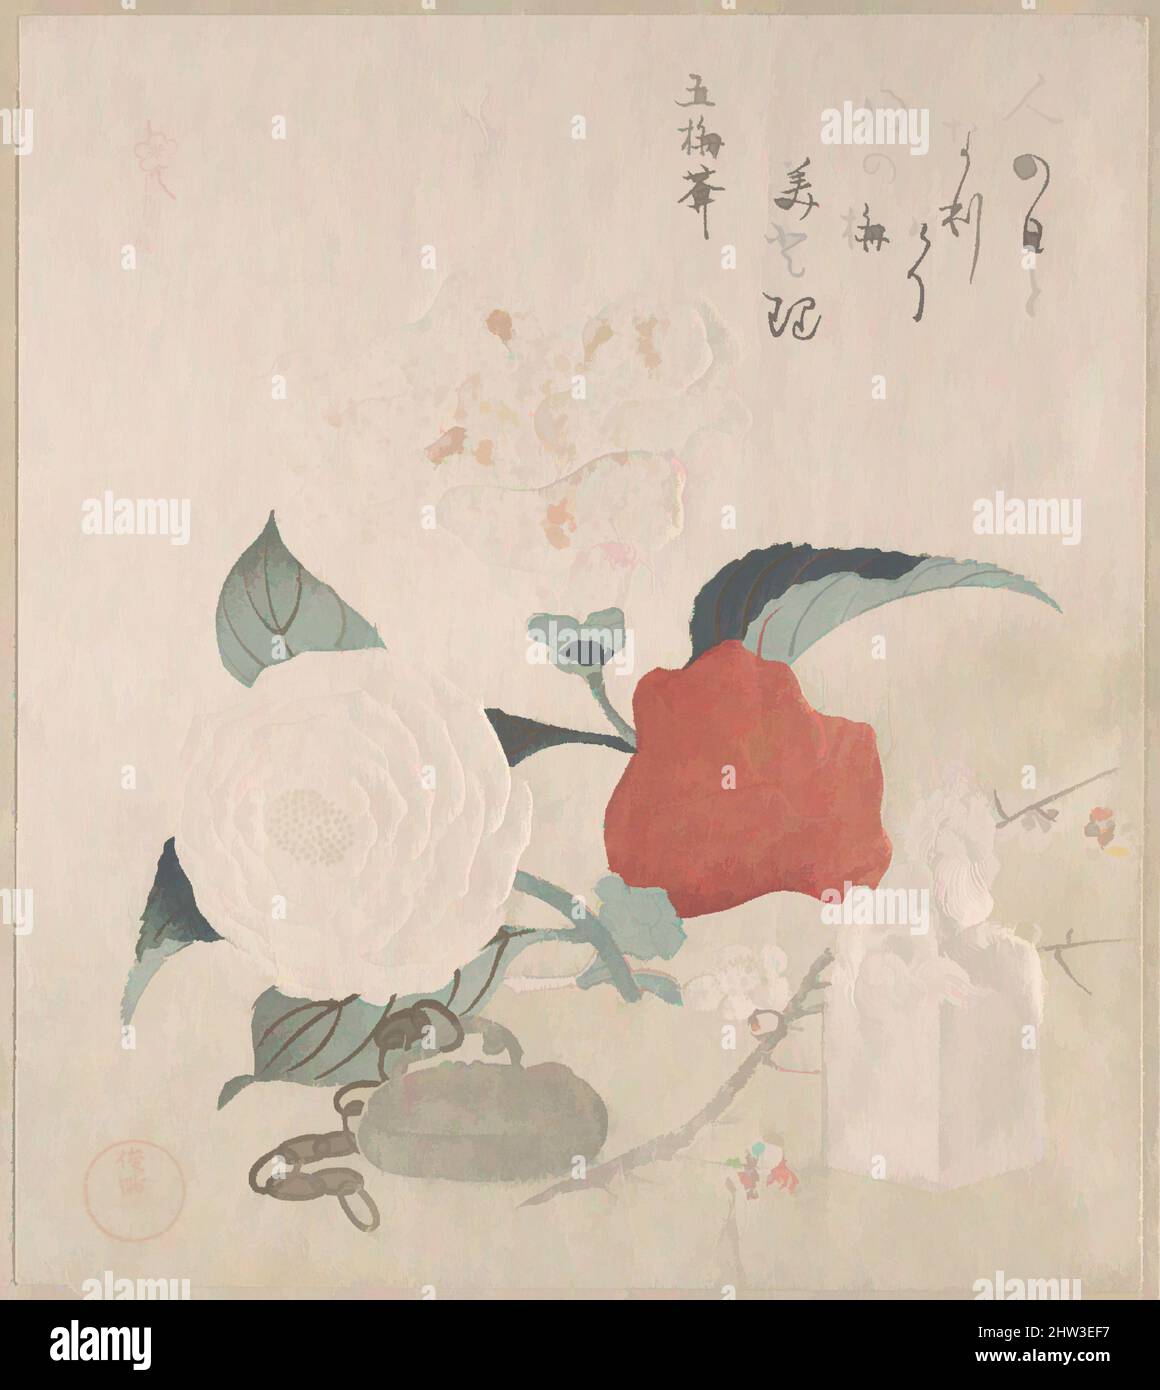 Art inspired by Camellia Flowers, a Netsuke and a Seal, 19th century, Japan, Part of an album of woodblock prints (surimono); ink and color on paper, 8 3/8 x 7 3/8 in. (21.3 x 18.7 cm), Prints, Kubo Shunman (Japanese, 1757–1820, Classic works modernized by Artotop with a splash of modernity. Shapes, color and value, eye-catching visual impact on art. Emotions through freedom of artworks in a contemporary way. A timeless message pursuing a wildly creative new direction. Artists turning to the digital medium and creating the Artotop NFT Stock Photo